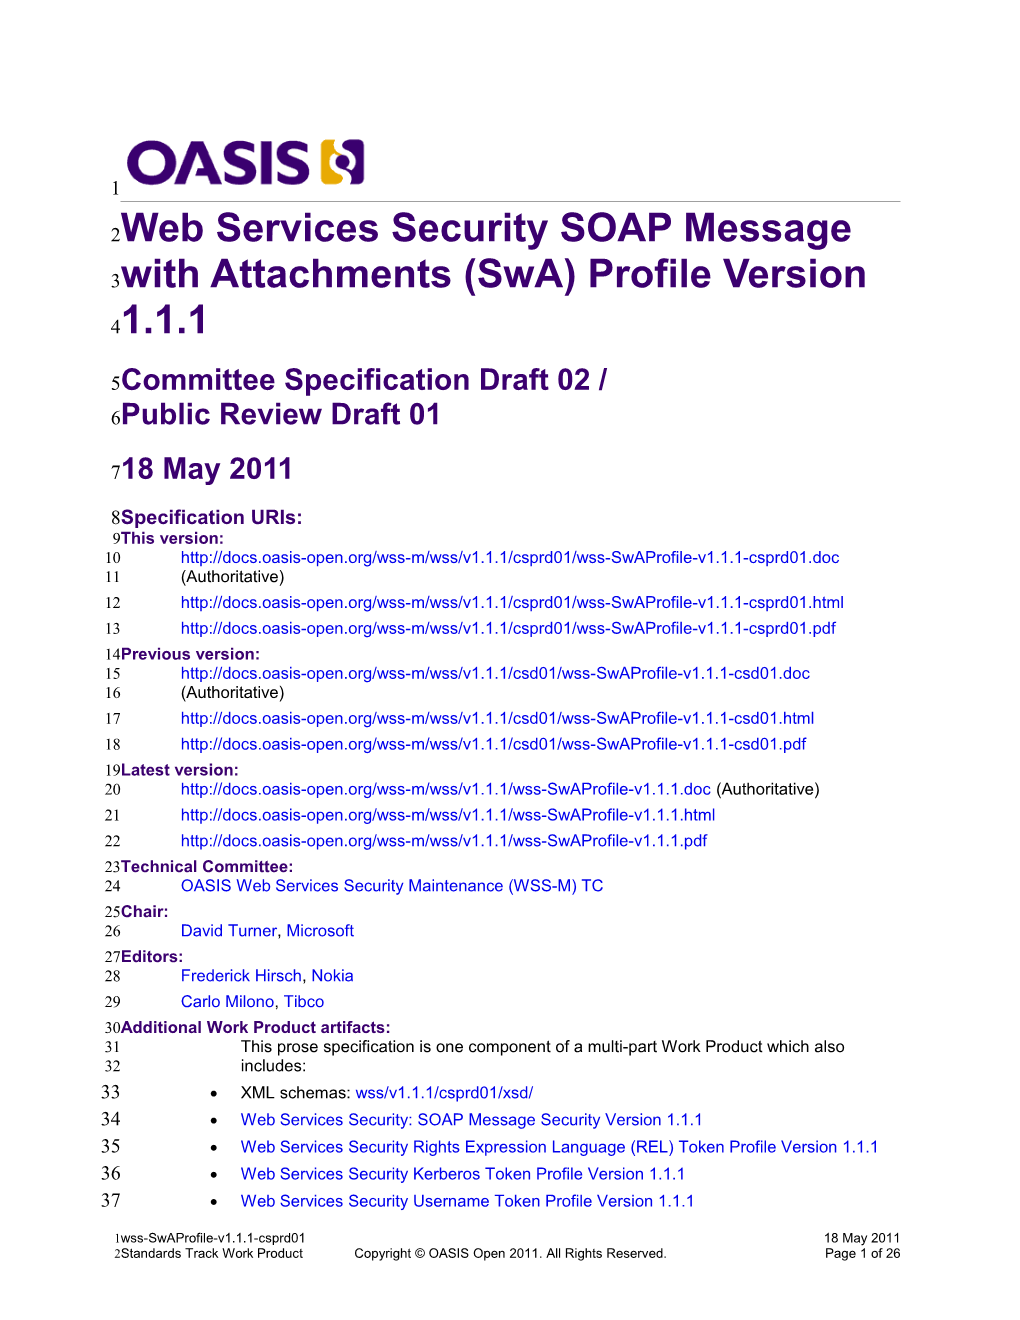 Web Services Security SOAP Message with Attachments (Swa) Profile Version 1.1.1